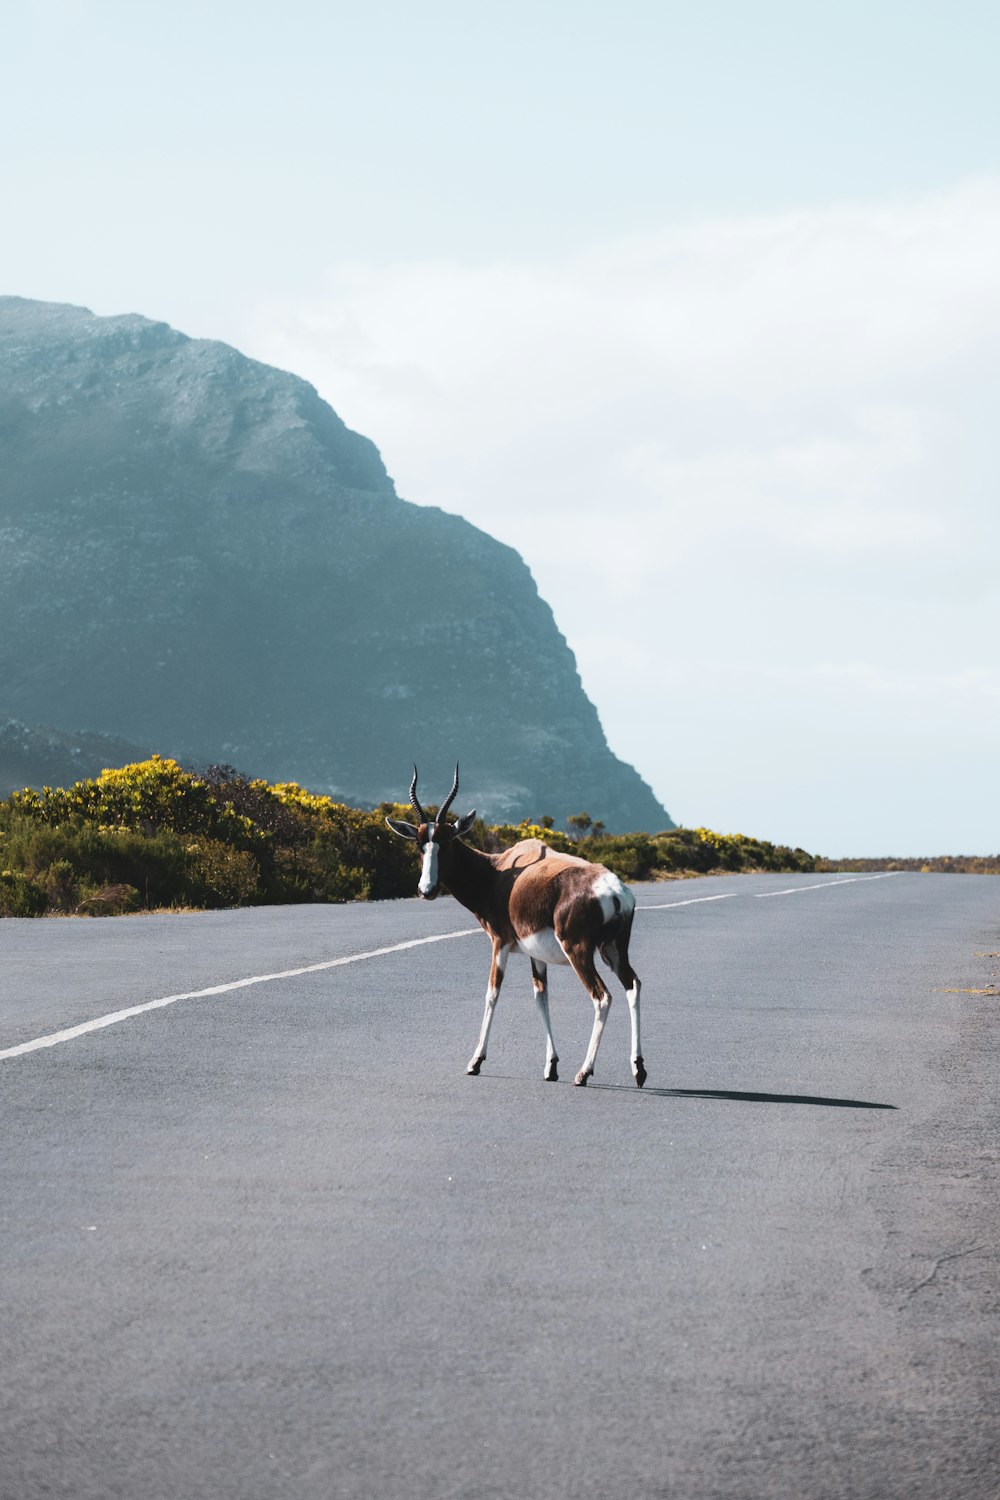 a horned animal walking on a road